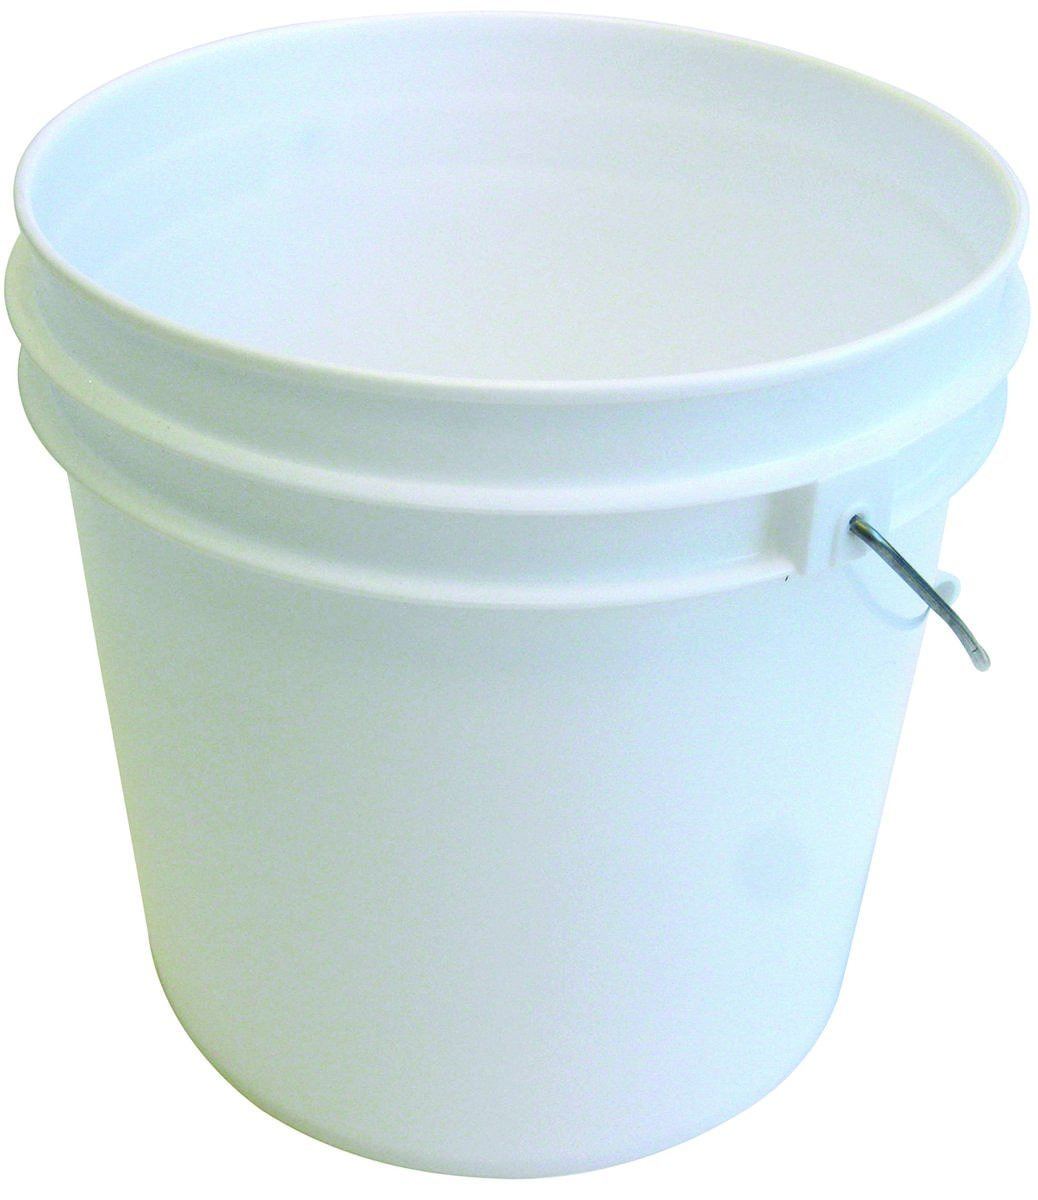 Plast Team Bucket Berry 10l Beige Without Squeezer 6059 Buckets BERRY BUCKET  10L WITHOUT A SQUARE 6059 BEIGE PLAST TEAM The Plast Team Berry bucket is  perfect for cleaning, wiping and washing.